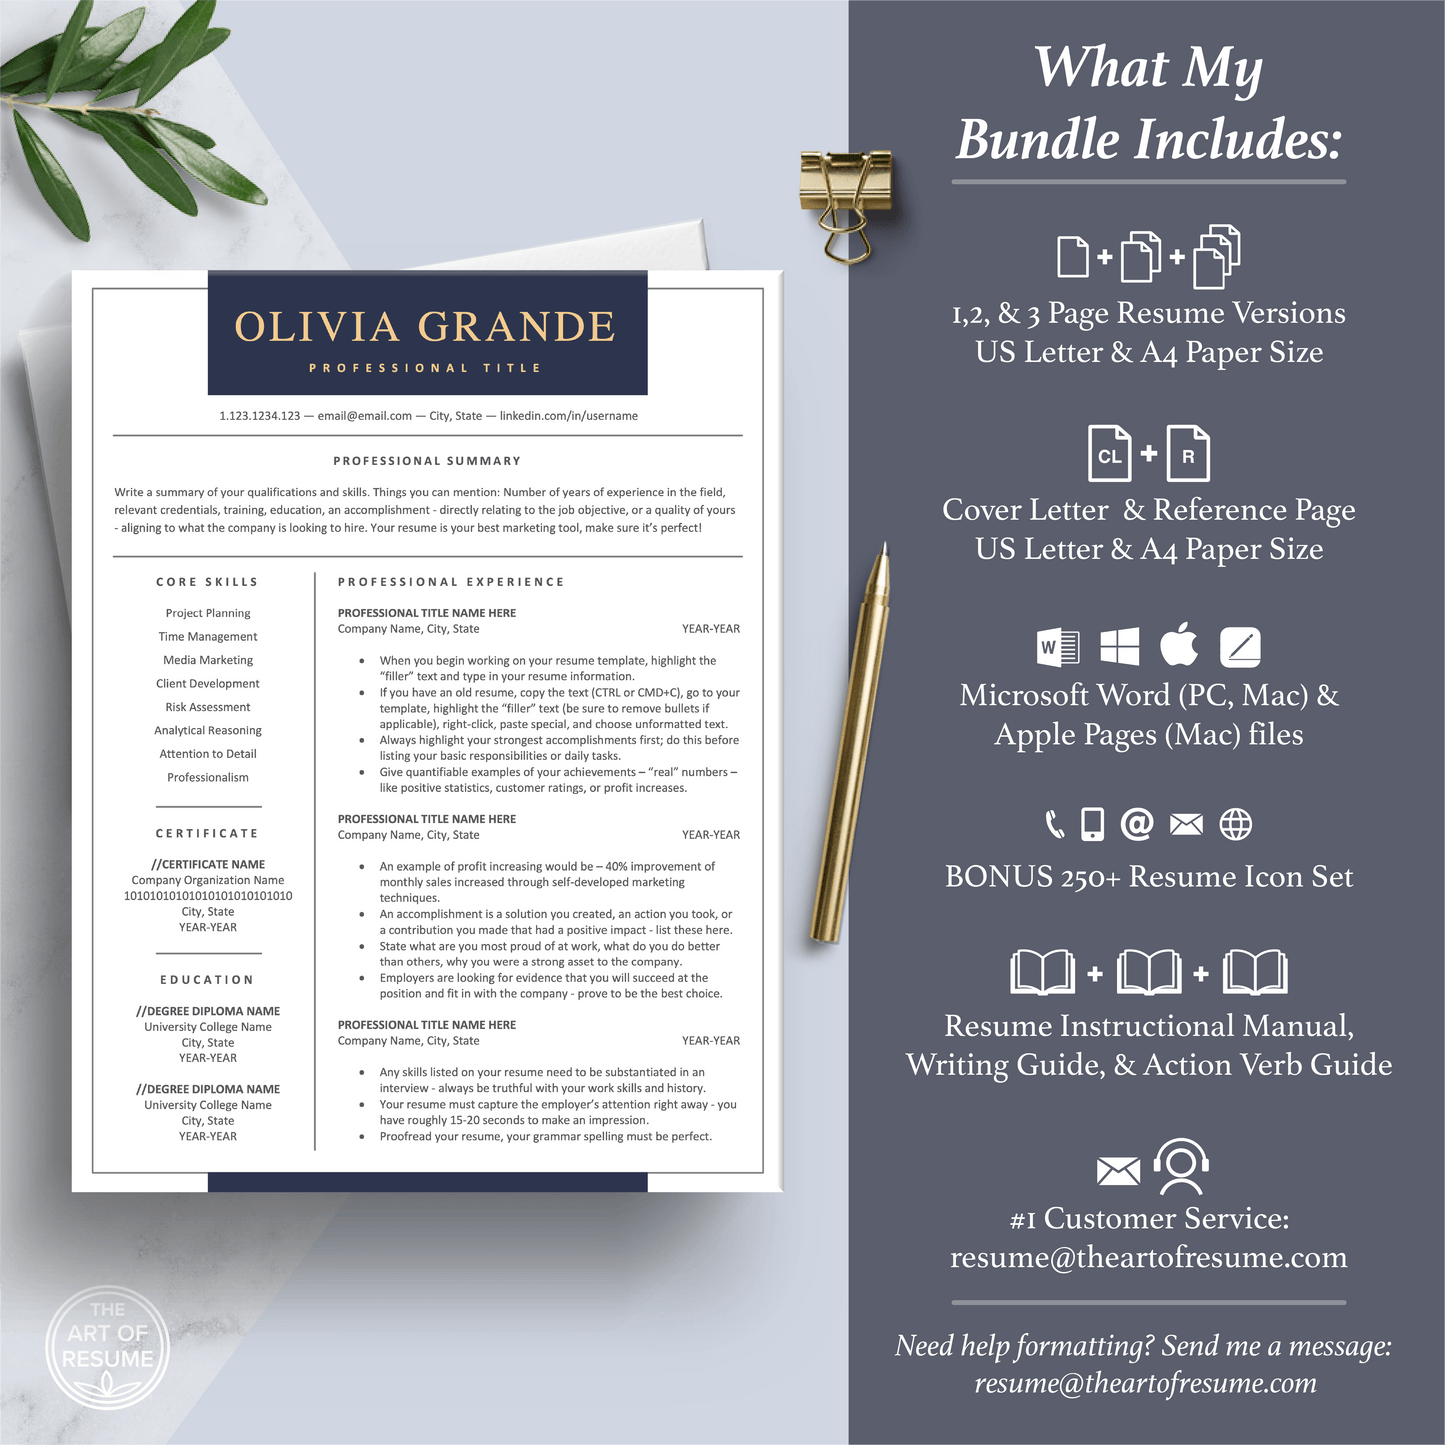 The Art of Resume Templates | Professional Navy Resume CV Template Maker 3, Cover Letter, Reference Page, Mac, PC, A4 Paper, US size, Free Guide, The Art of Resume Writing, 250 Bonus Resume Icons